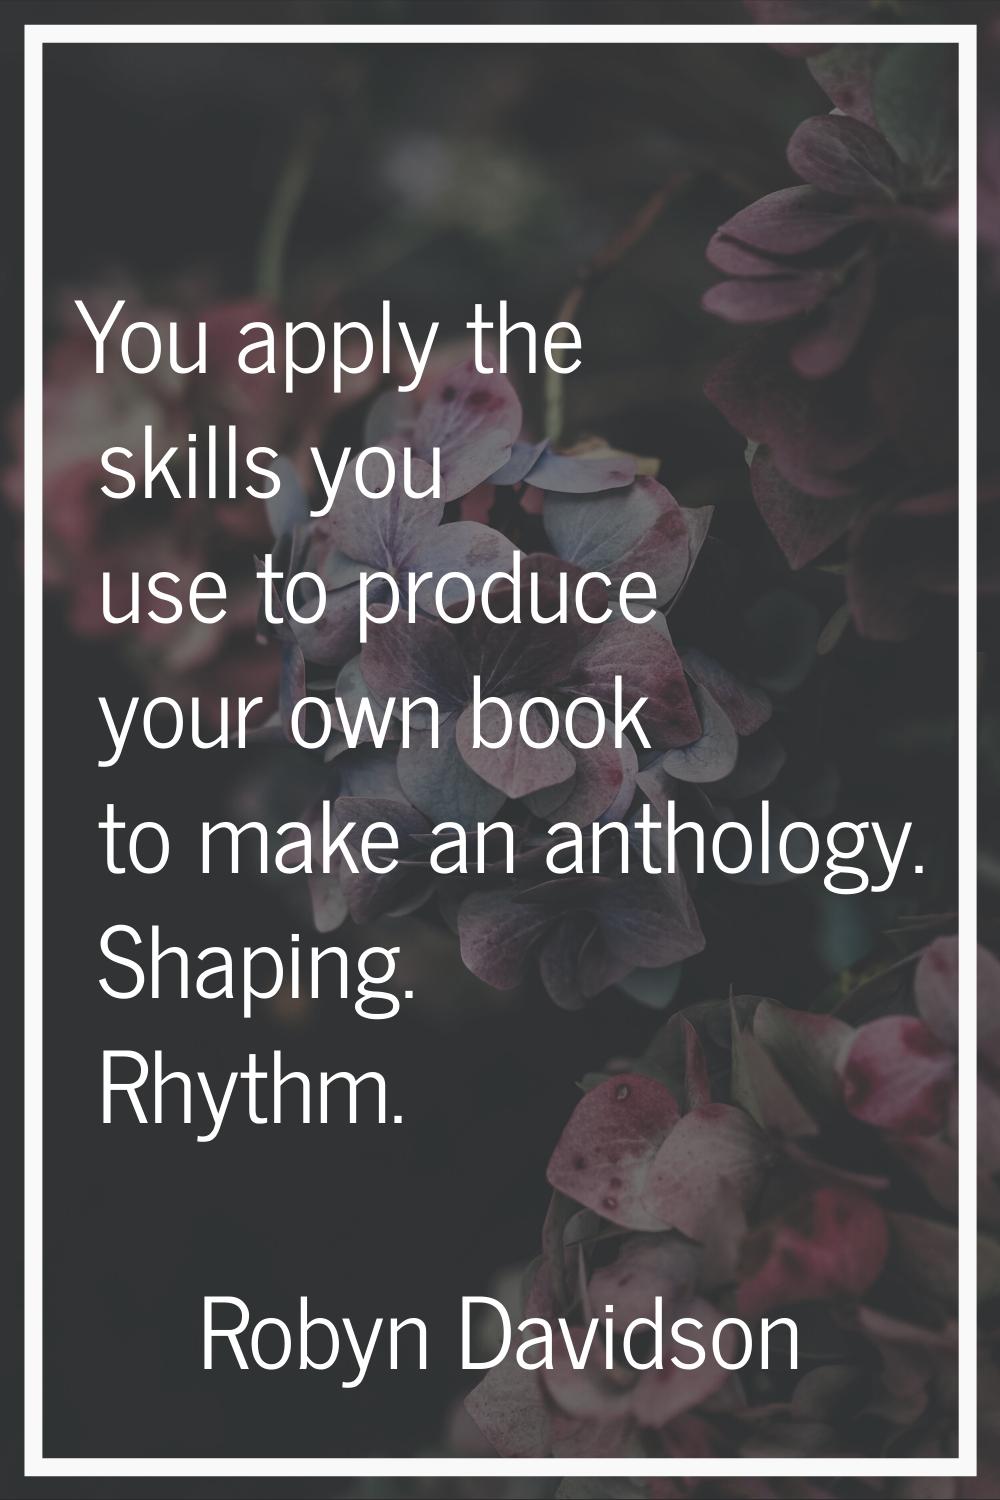 You apply the skills you use to produce your own book to make an anthology. Shaping. Rhythm.